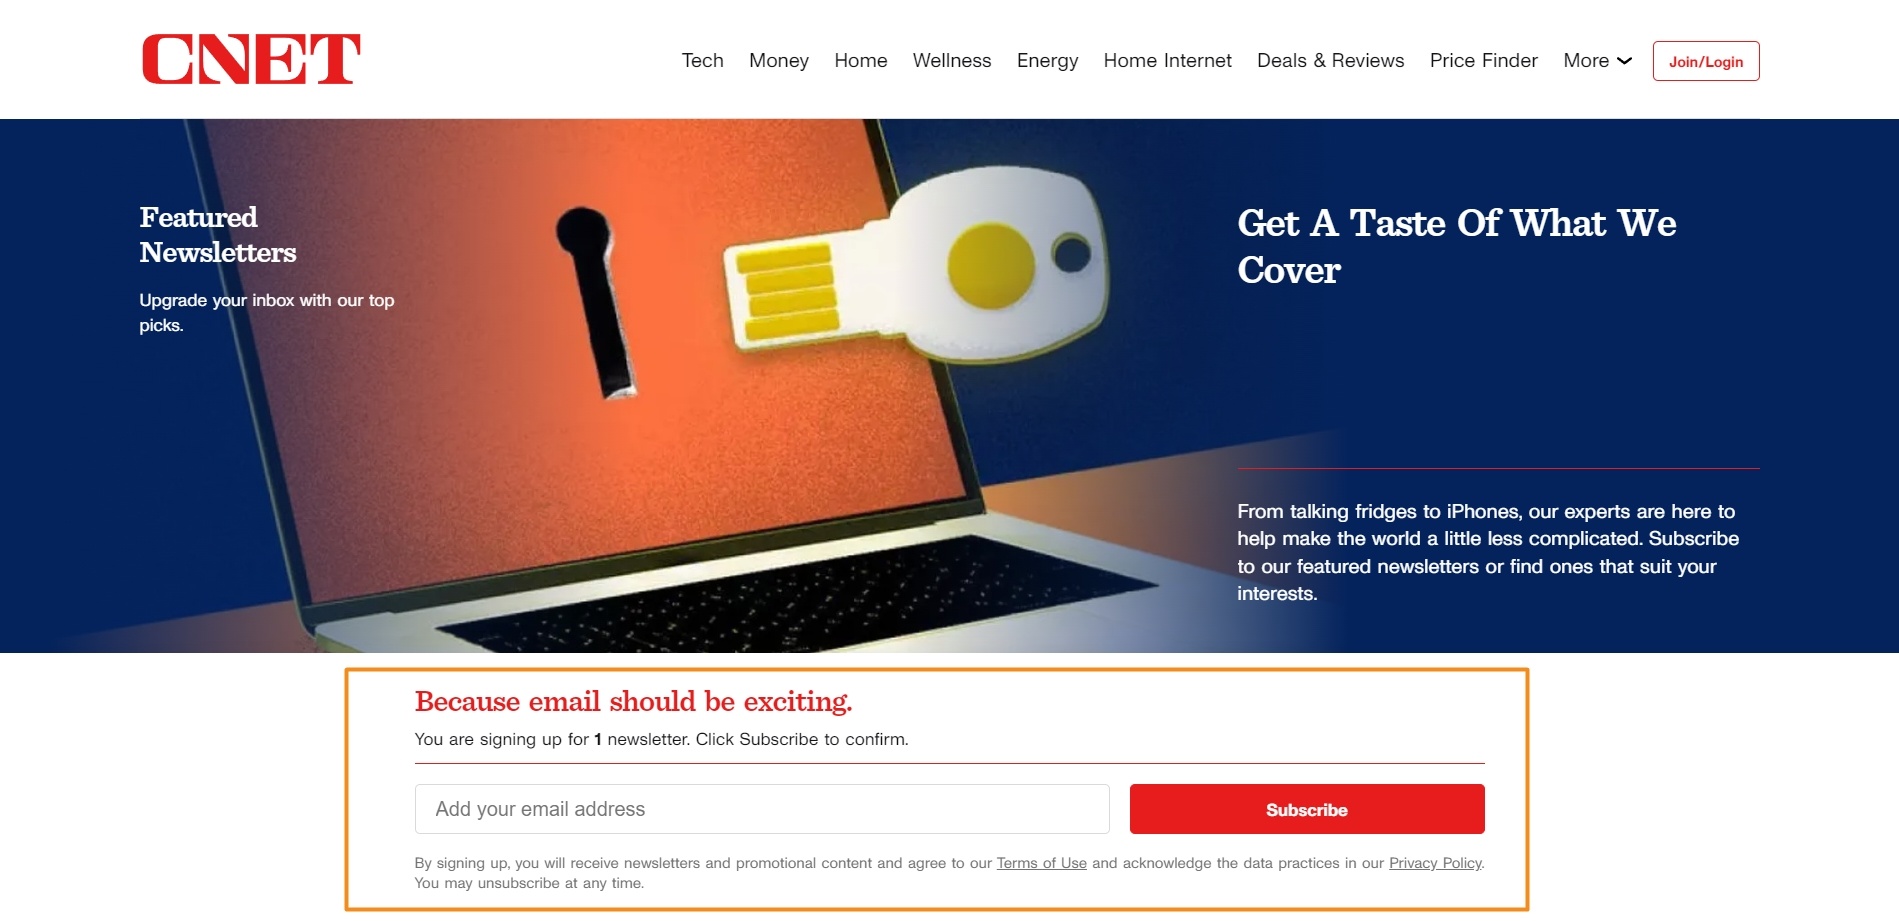 CNET’s email sign up example offers a newsletter